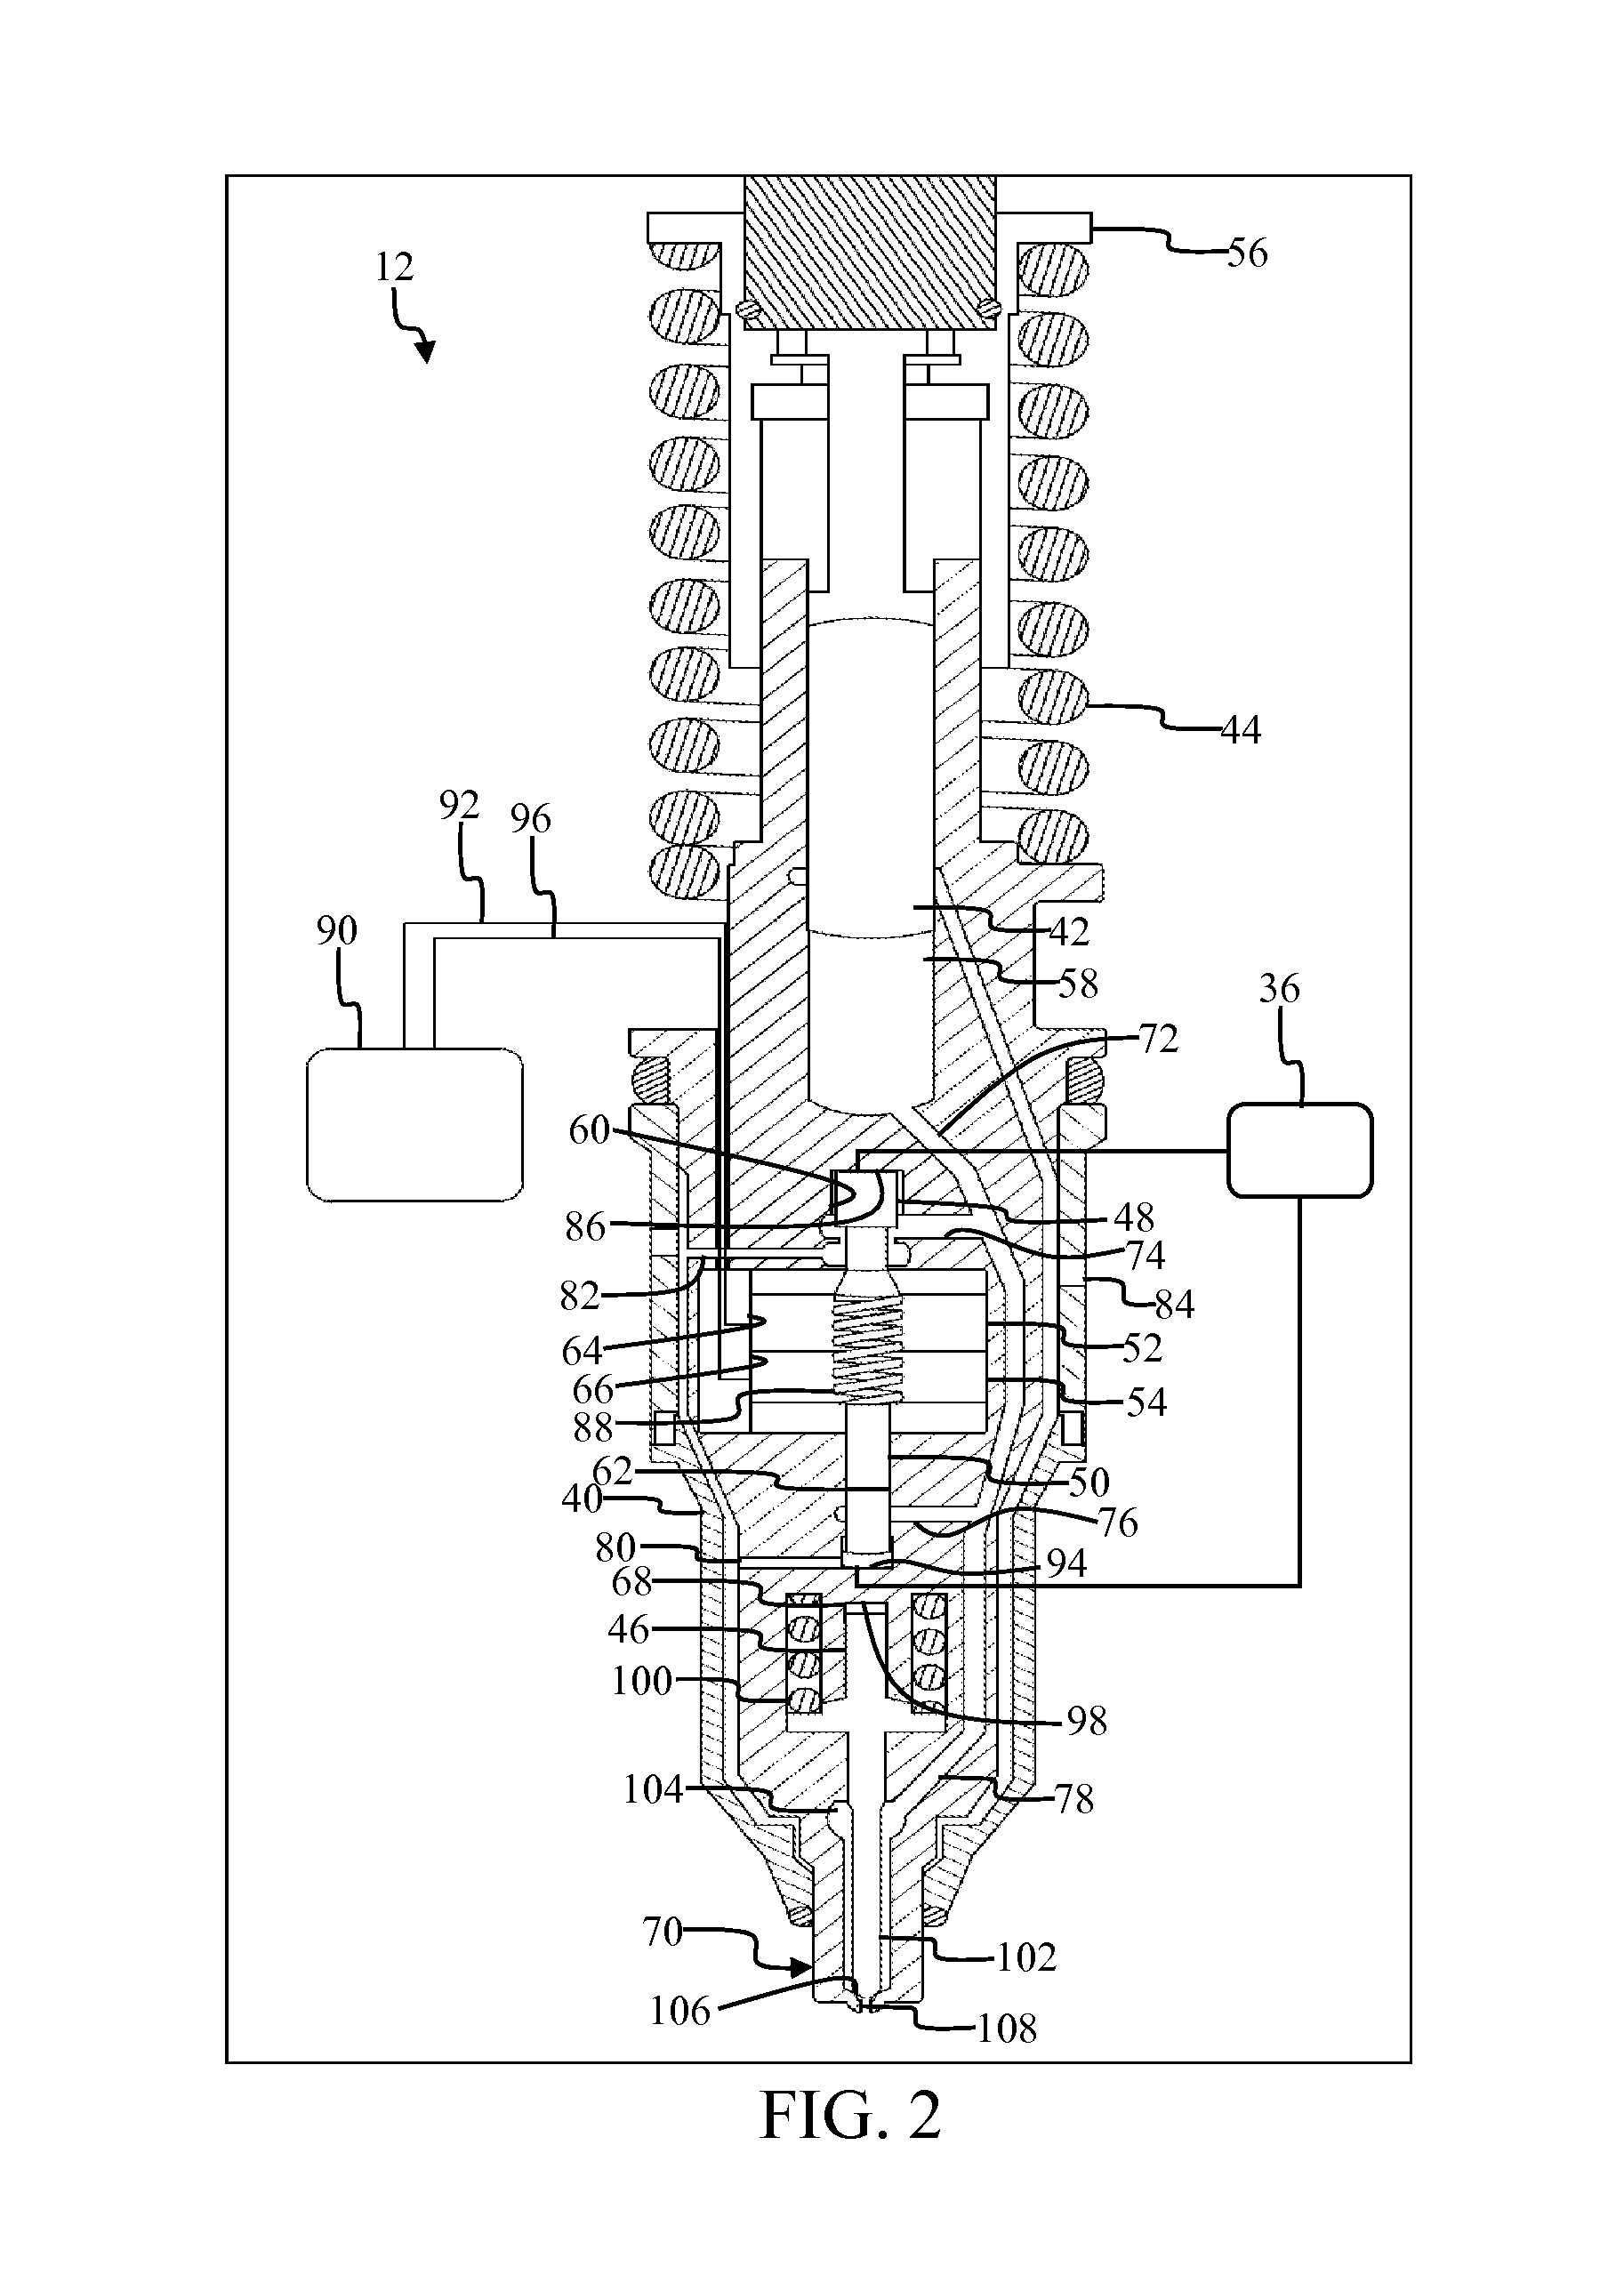 Method of controlling injection pressure level in unit injectors